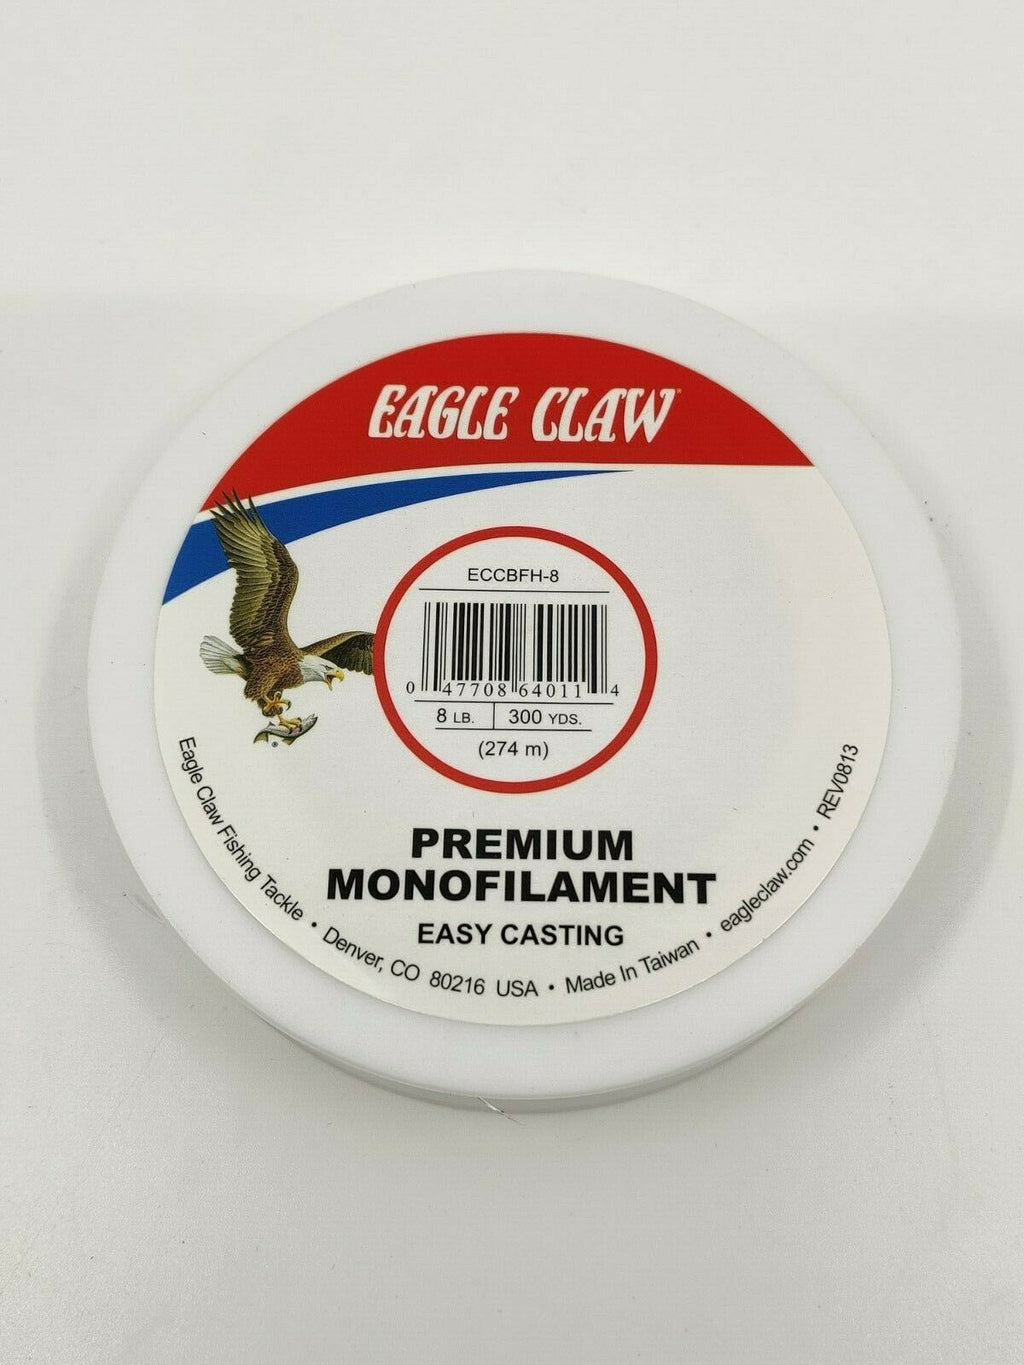 NEW EAGLE CLAW PREMIUM CLEAR MONOFILMENT 8LB 300YDS FREE SHIPPING